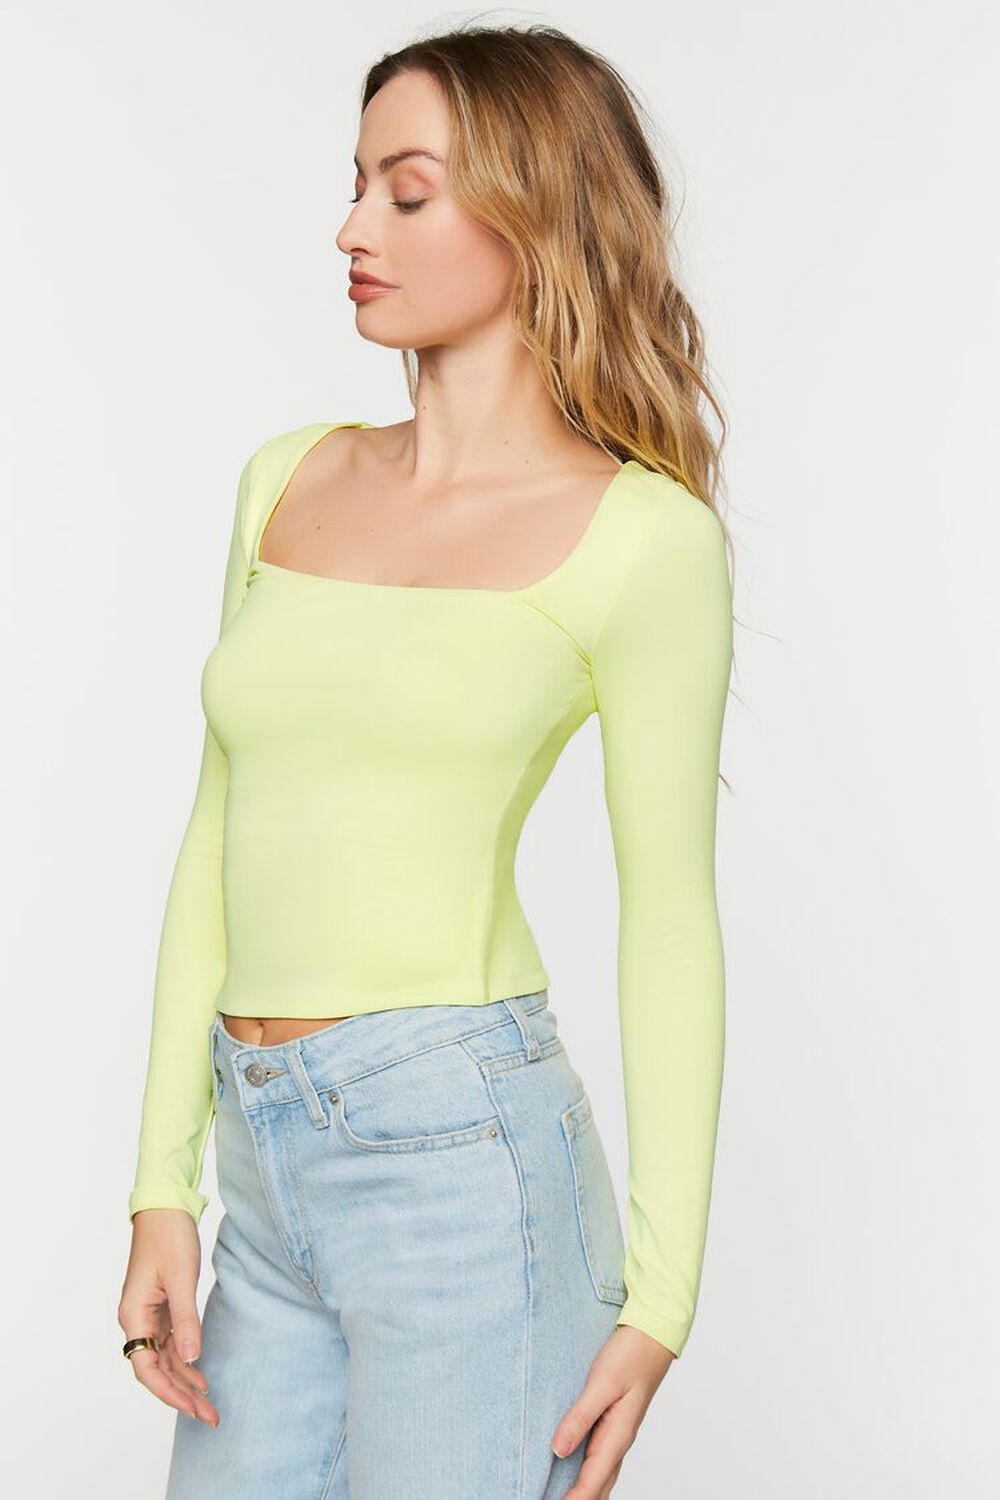 BUTTERFLY GREEN Long-Sleeve Square-Neck Top, image 2